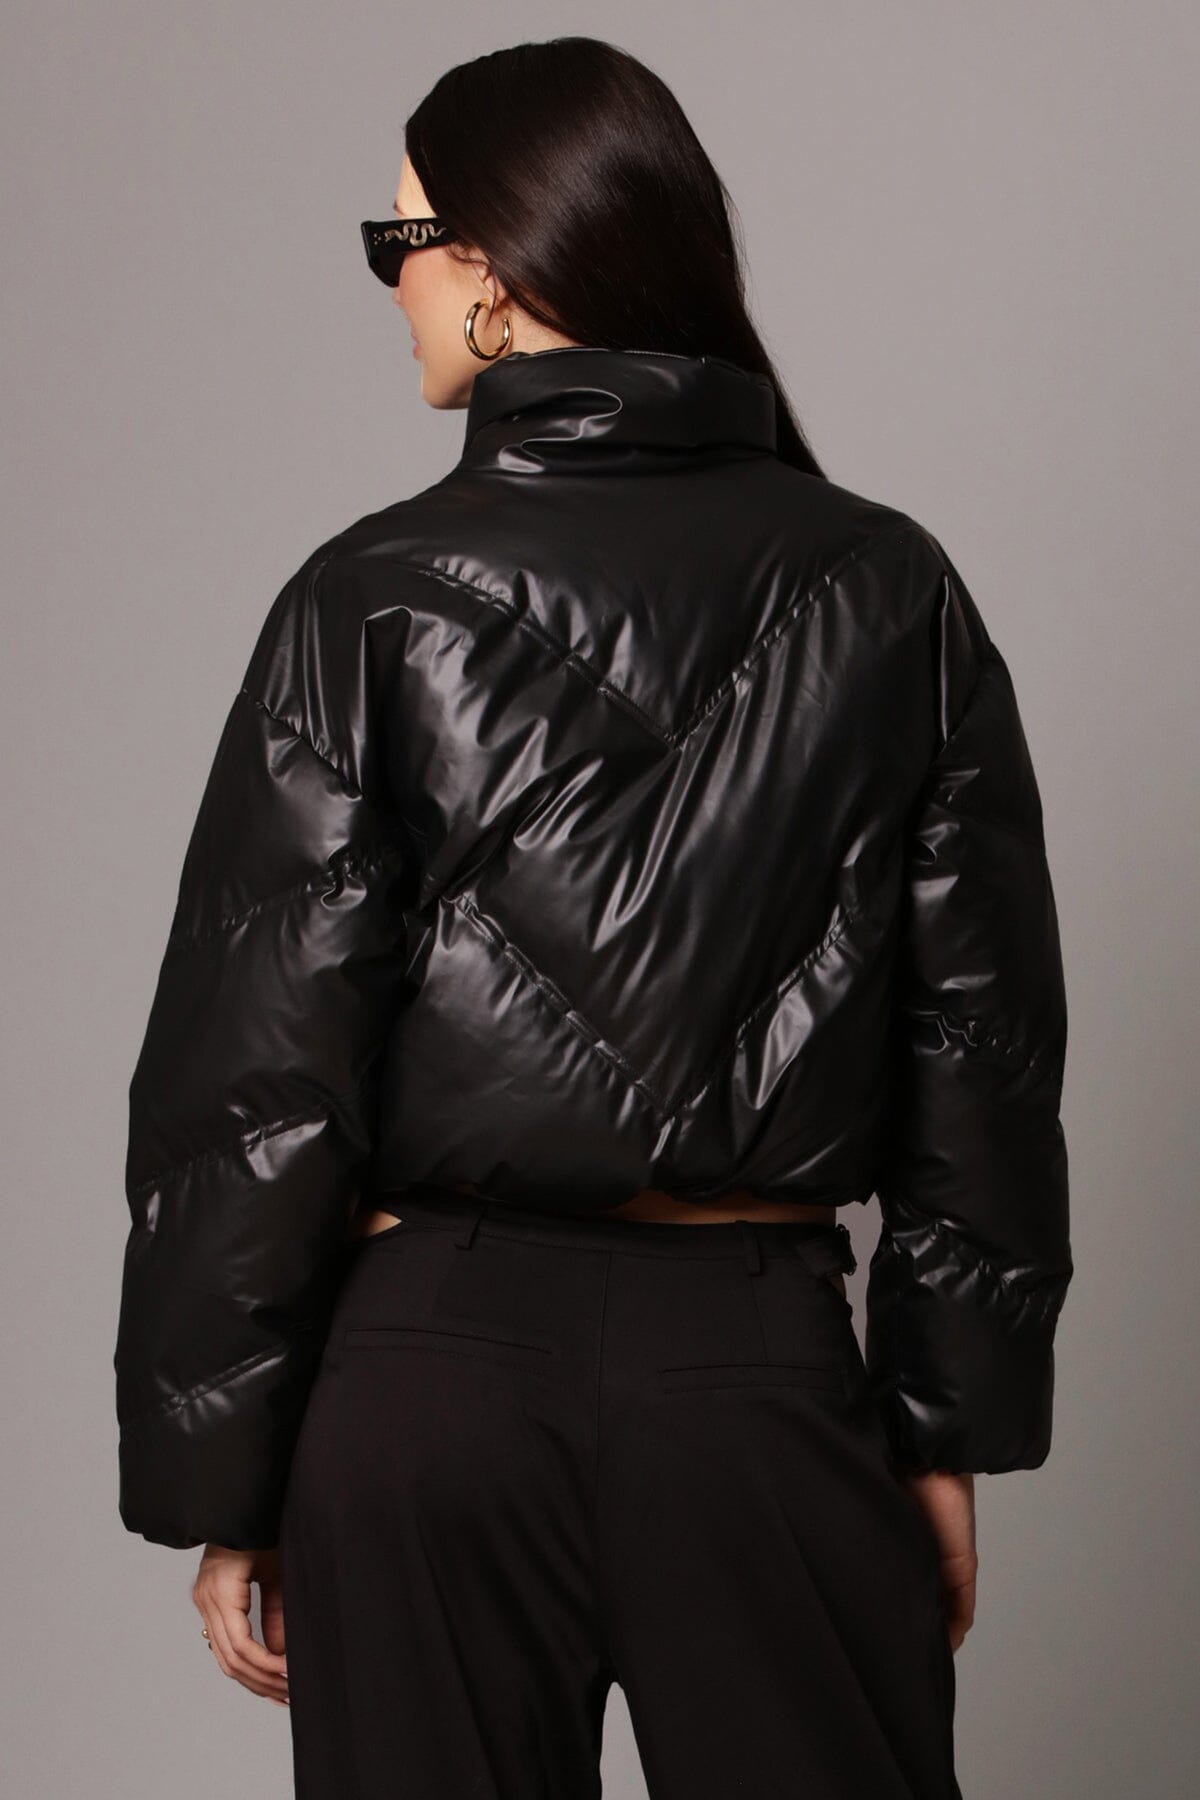 Black thermal puff glossy cropped puffer jacket coat - women's figure flattering puffers jackets for Fall fashion trends